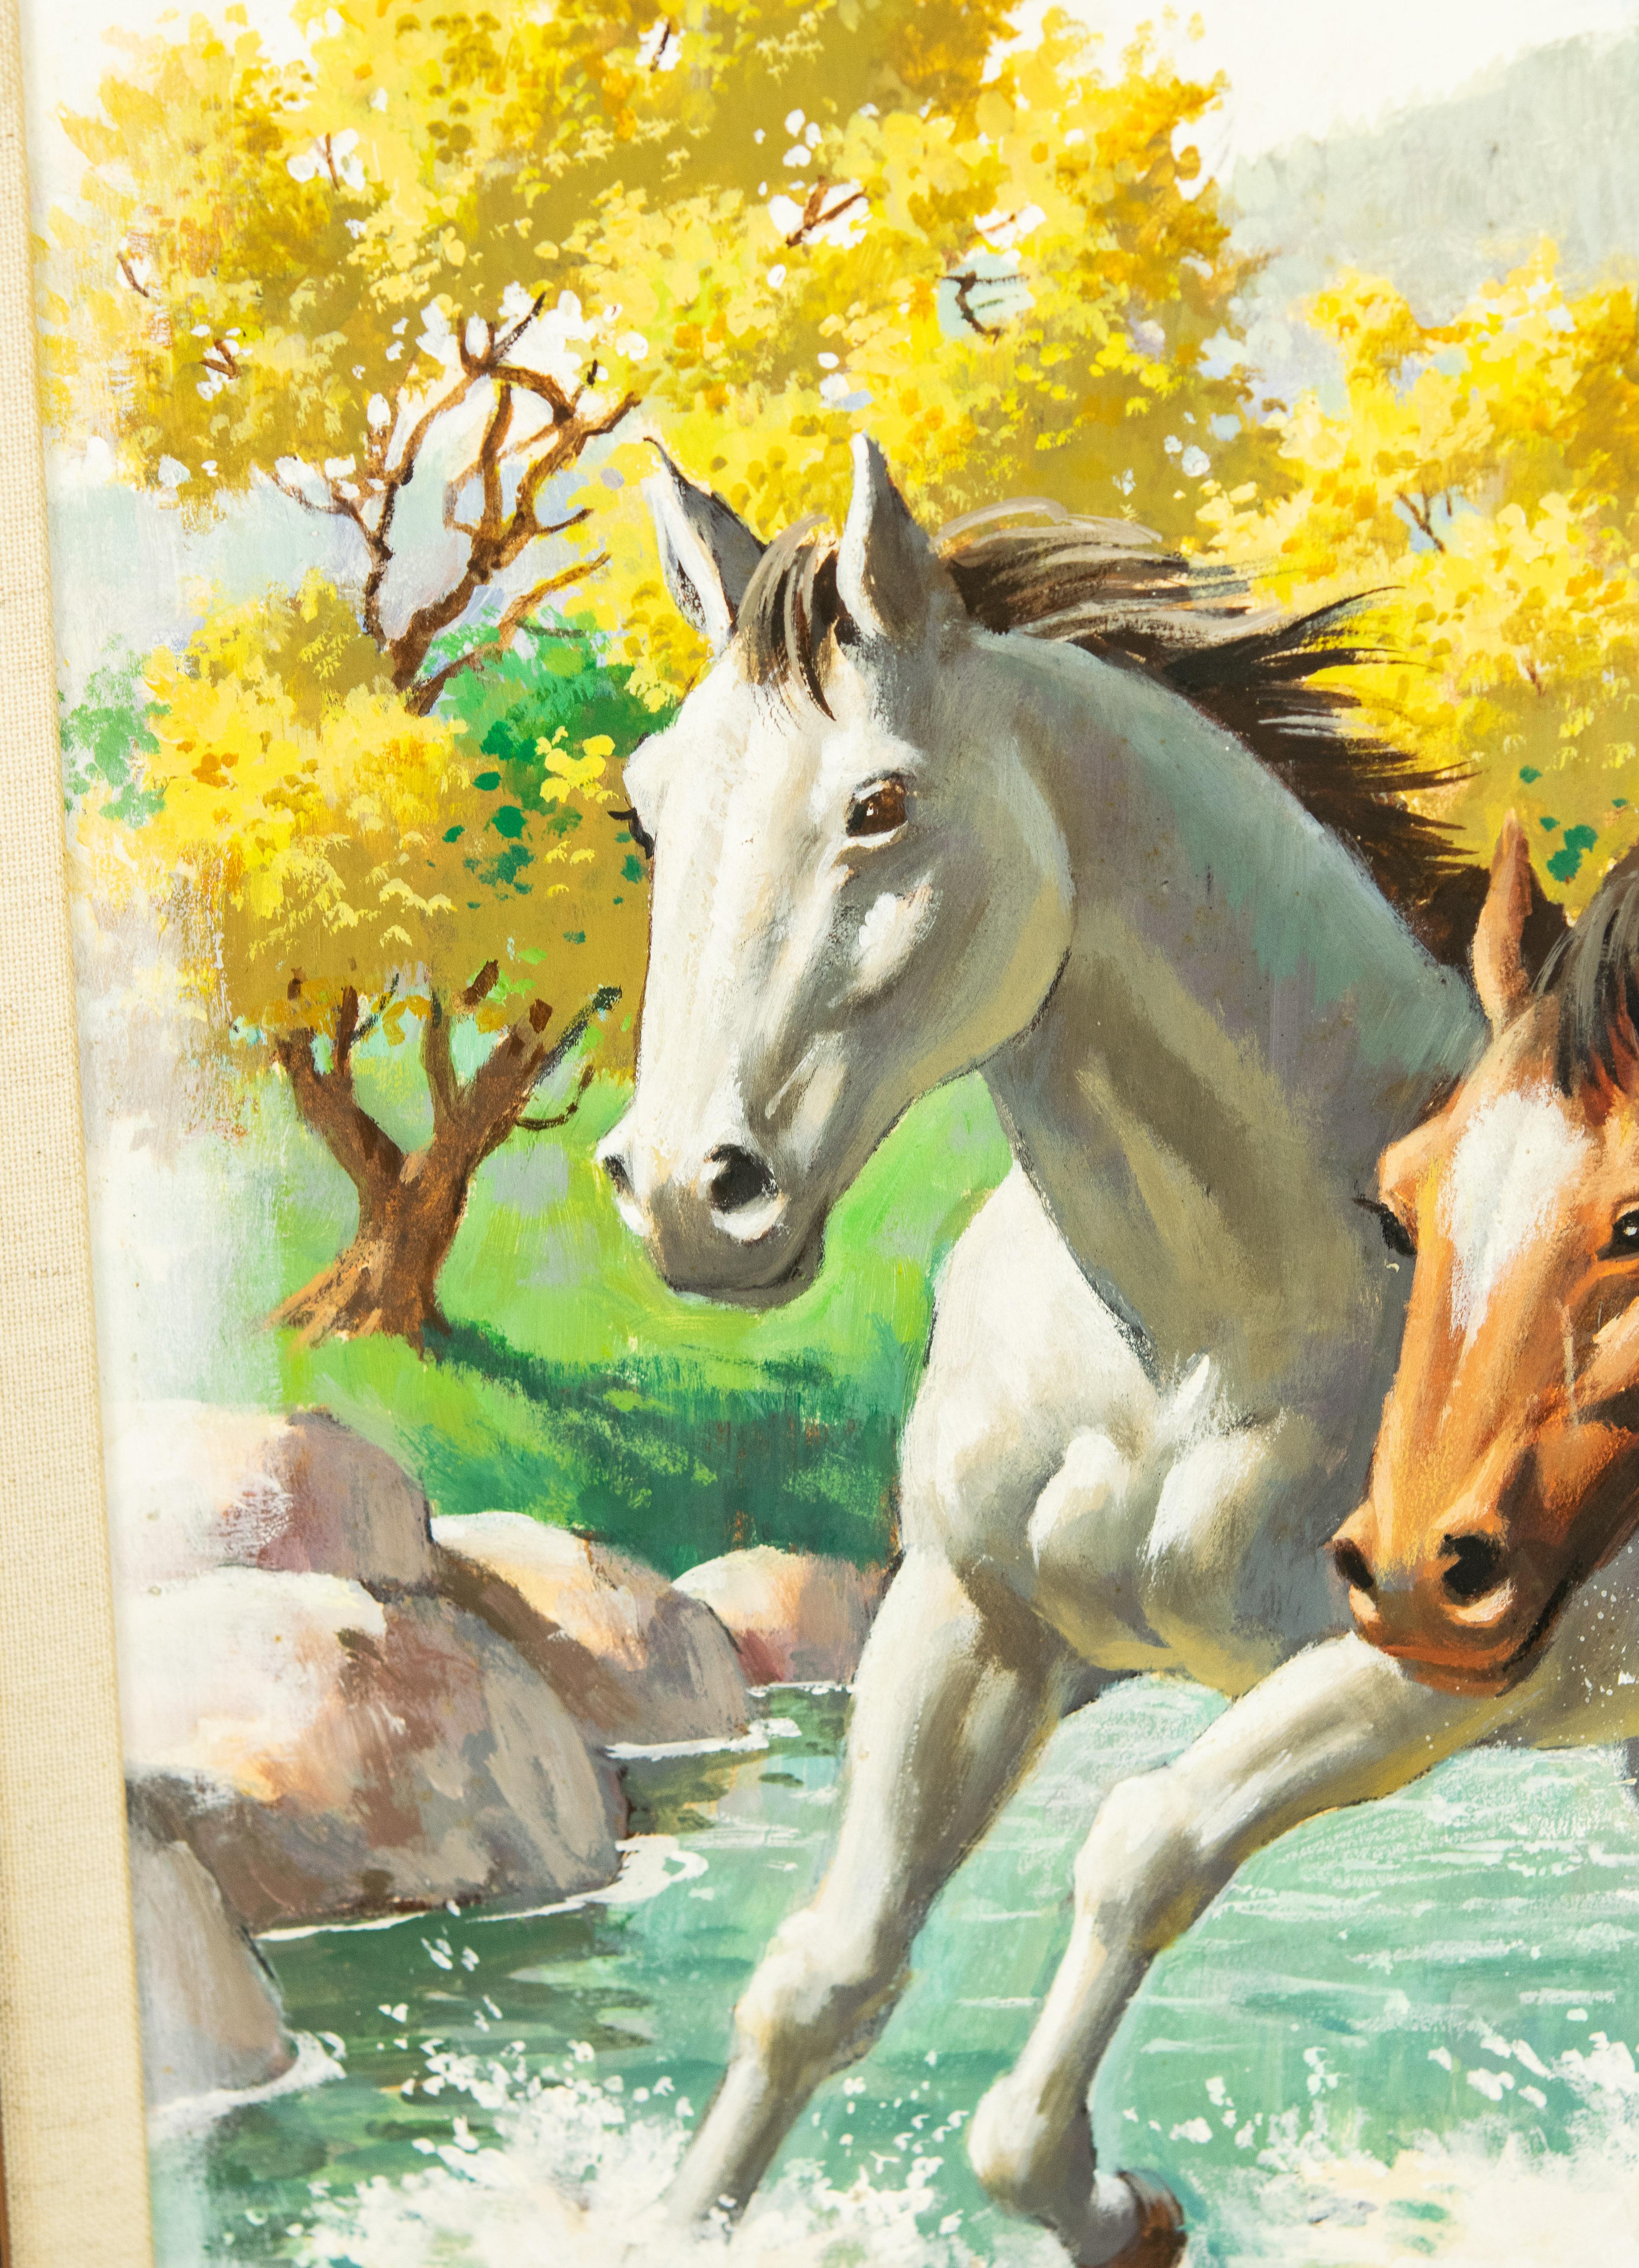 Arthur Saron Sarnoff Original Painting on Board of Horses Running in Stream  In Good Condition For Sale In Miami Beach, FL